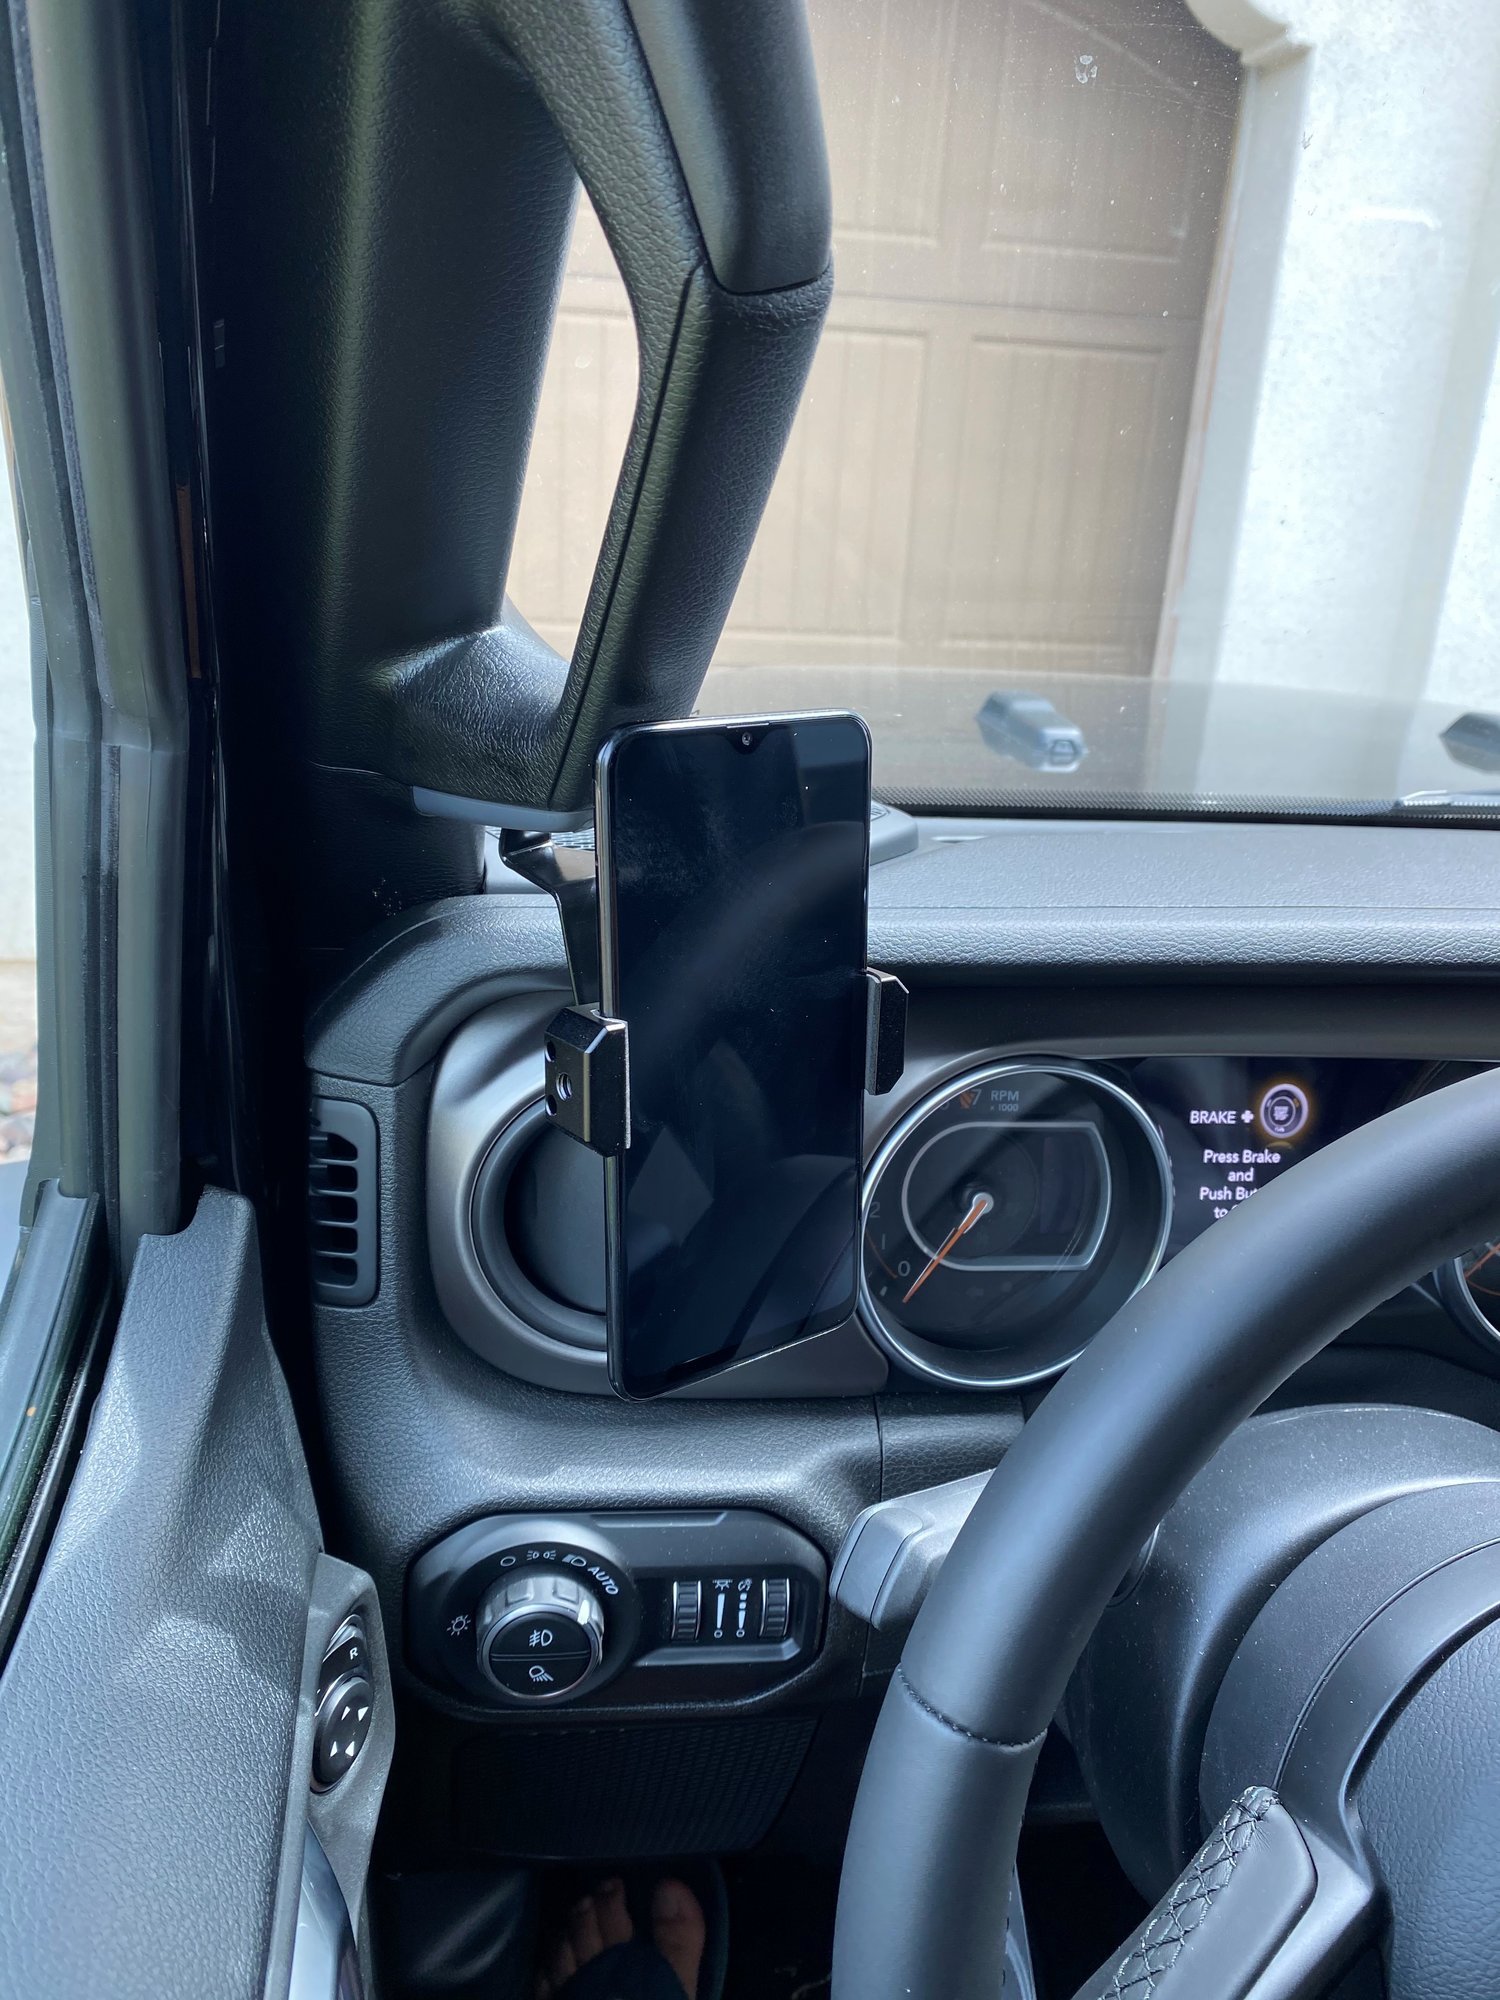 Jeep Wrangler Iphone Mount Clearance, SAVE 51%.